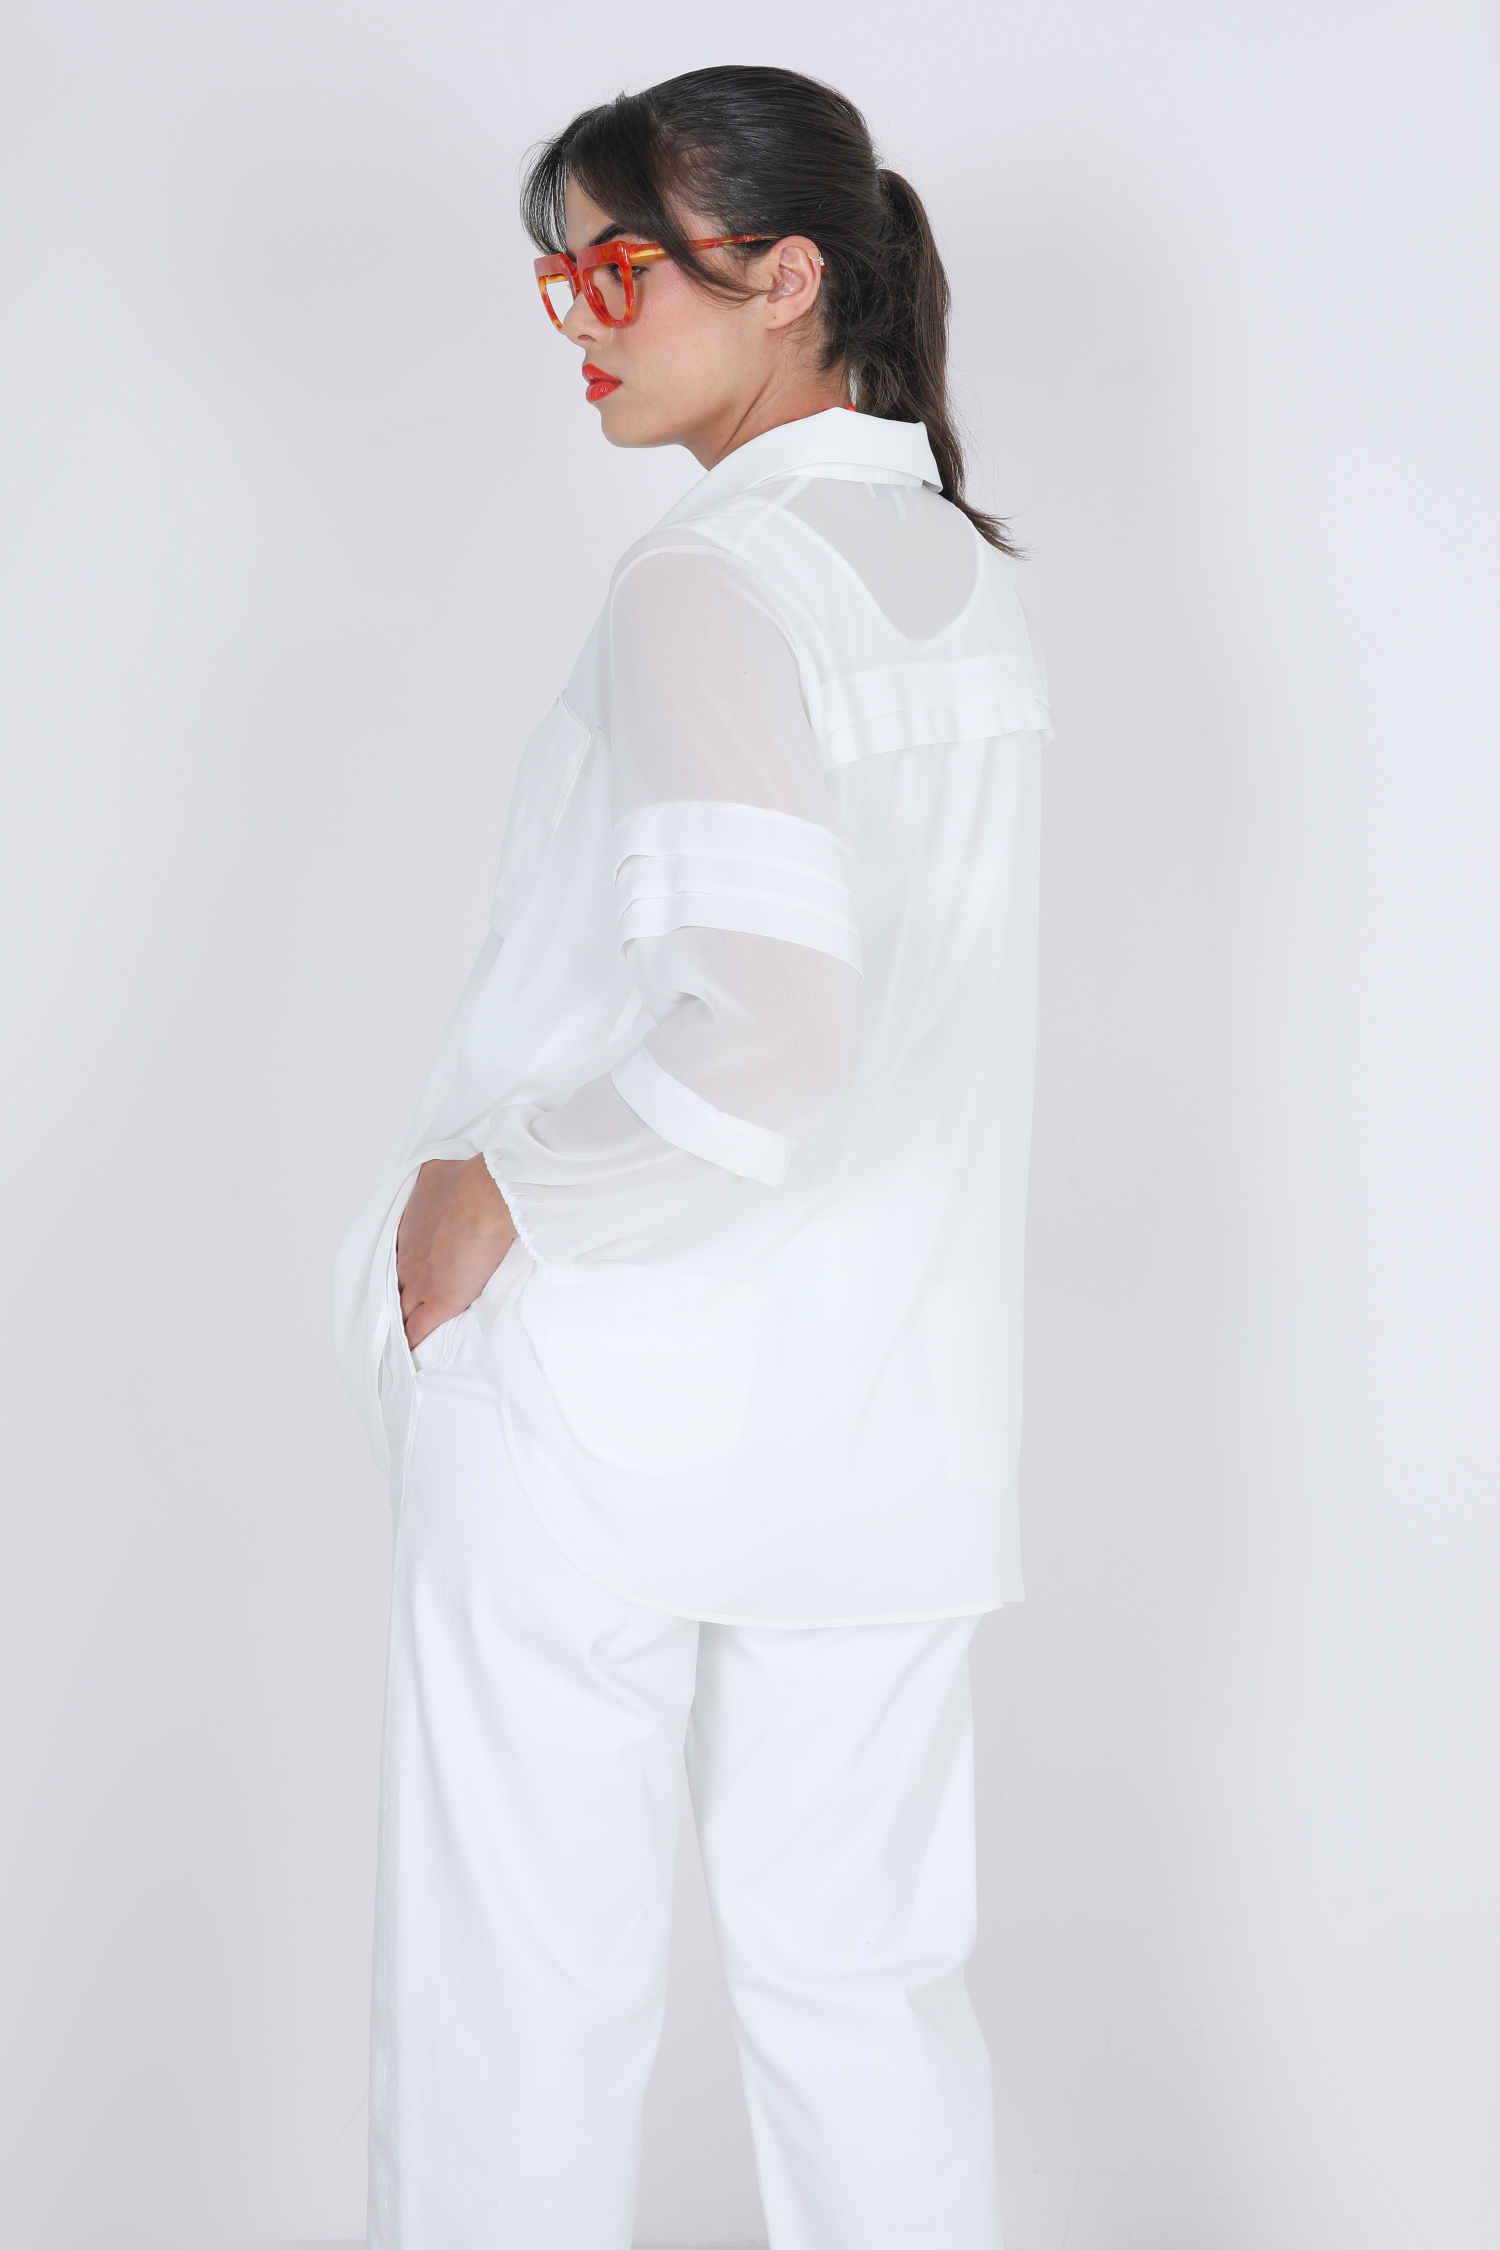 Plain voile shirt with a top underneath